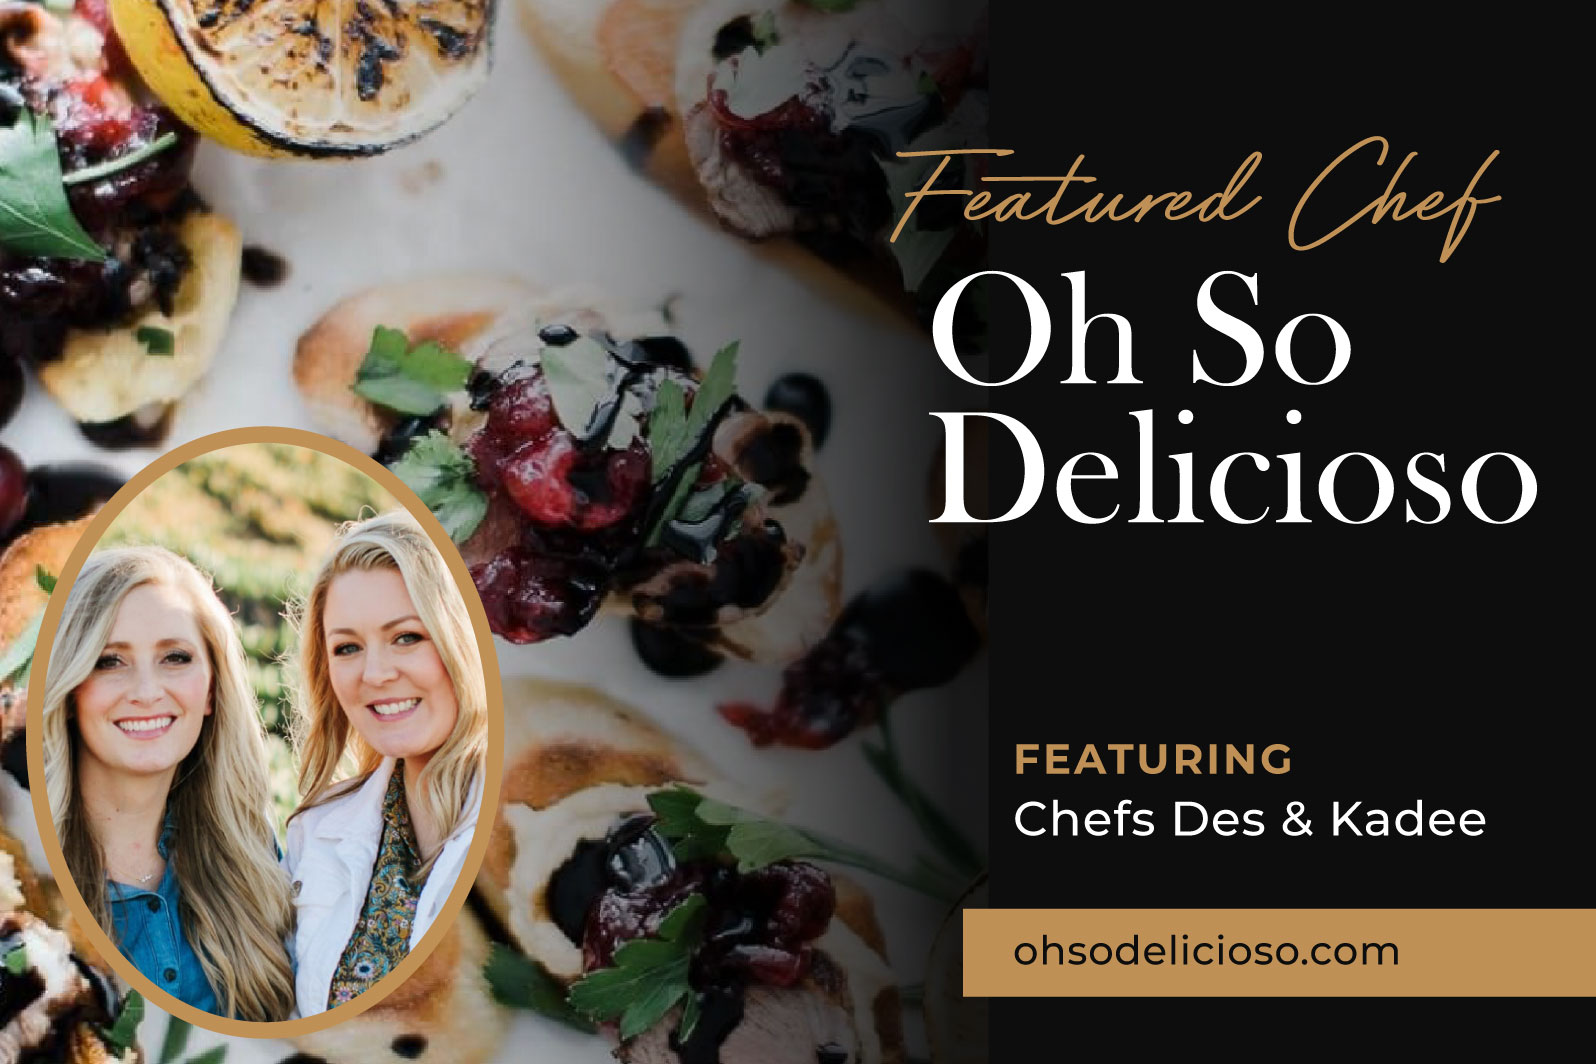 Featured graphic of Chefs Des and Kadee of Oh So Delicioso